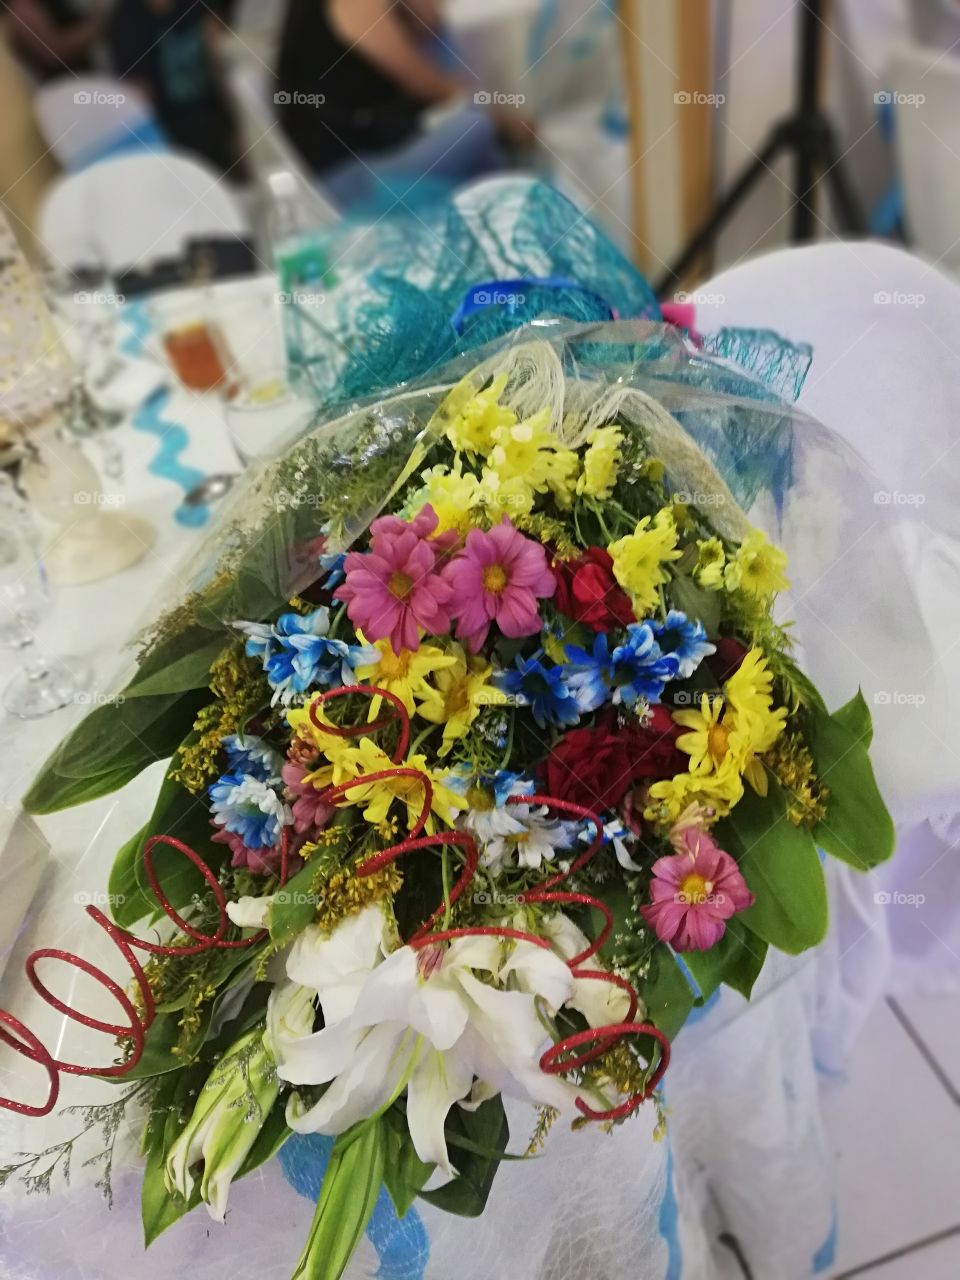 Bouquet of flowers for someone special